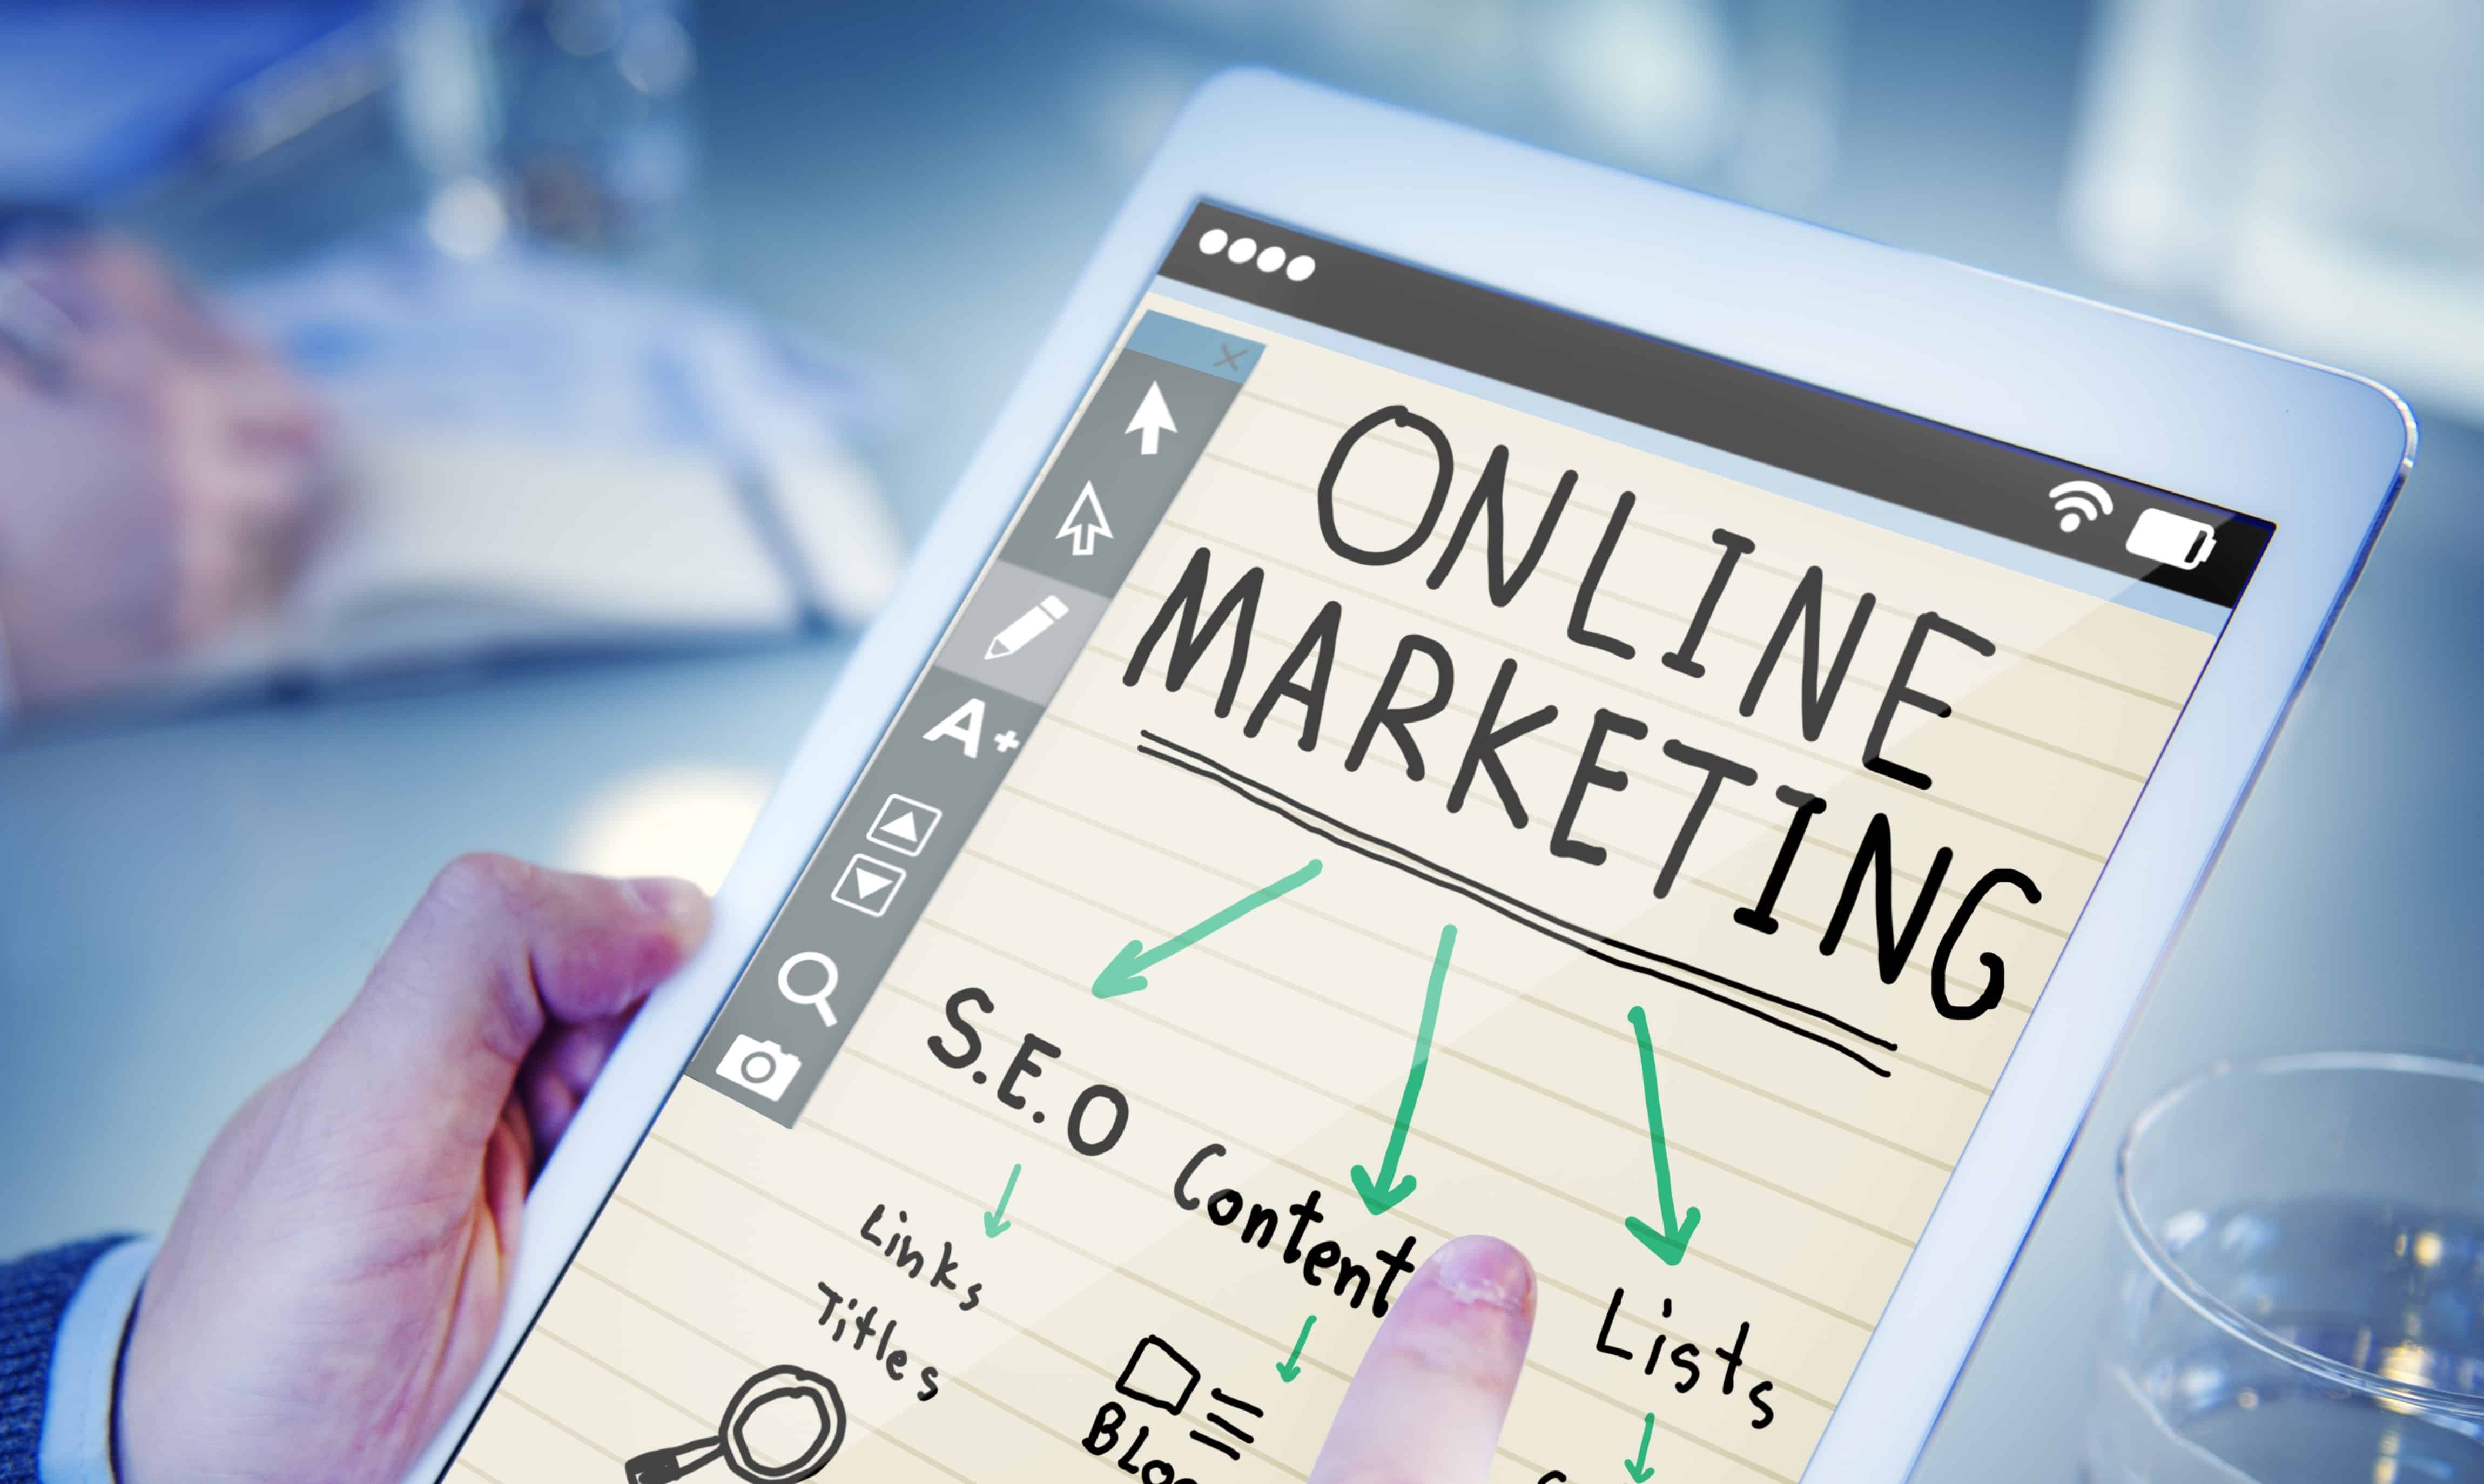 About Online Marketing